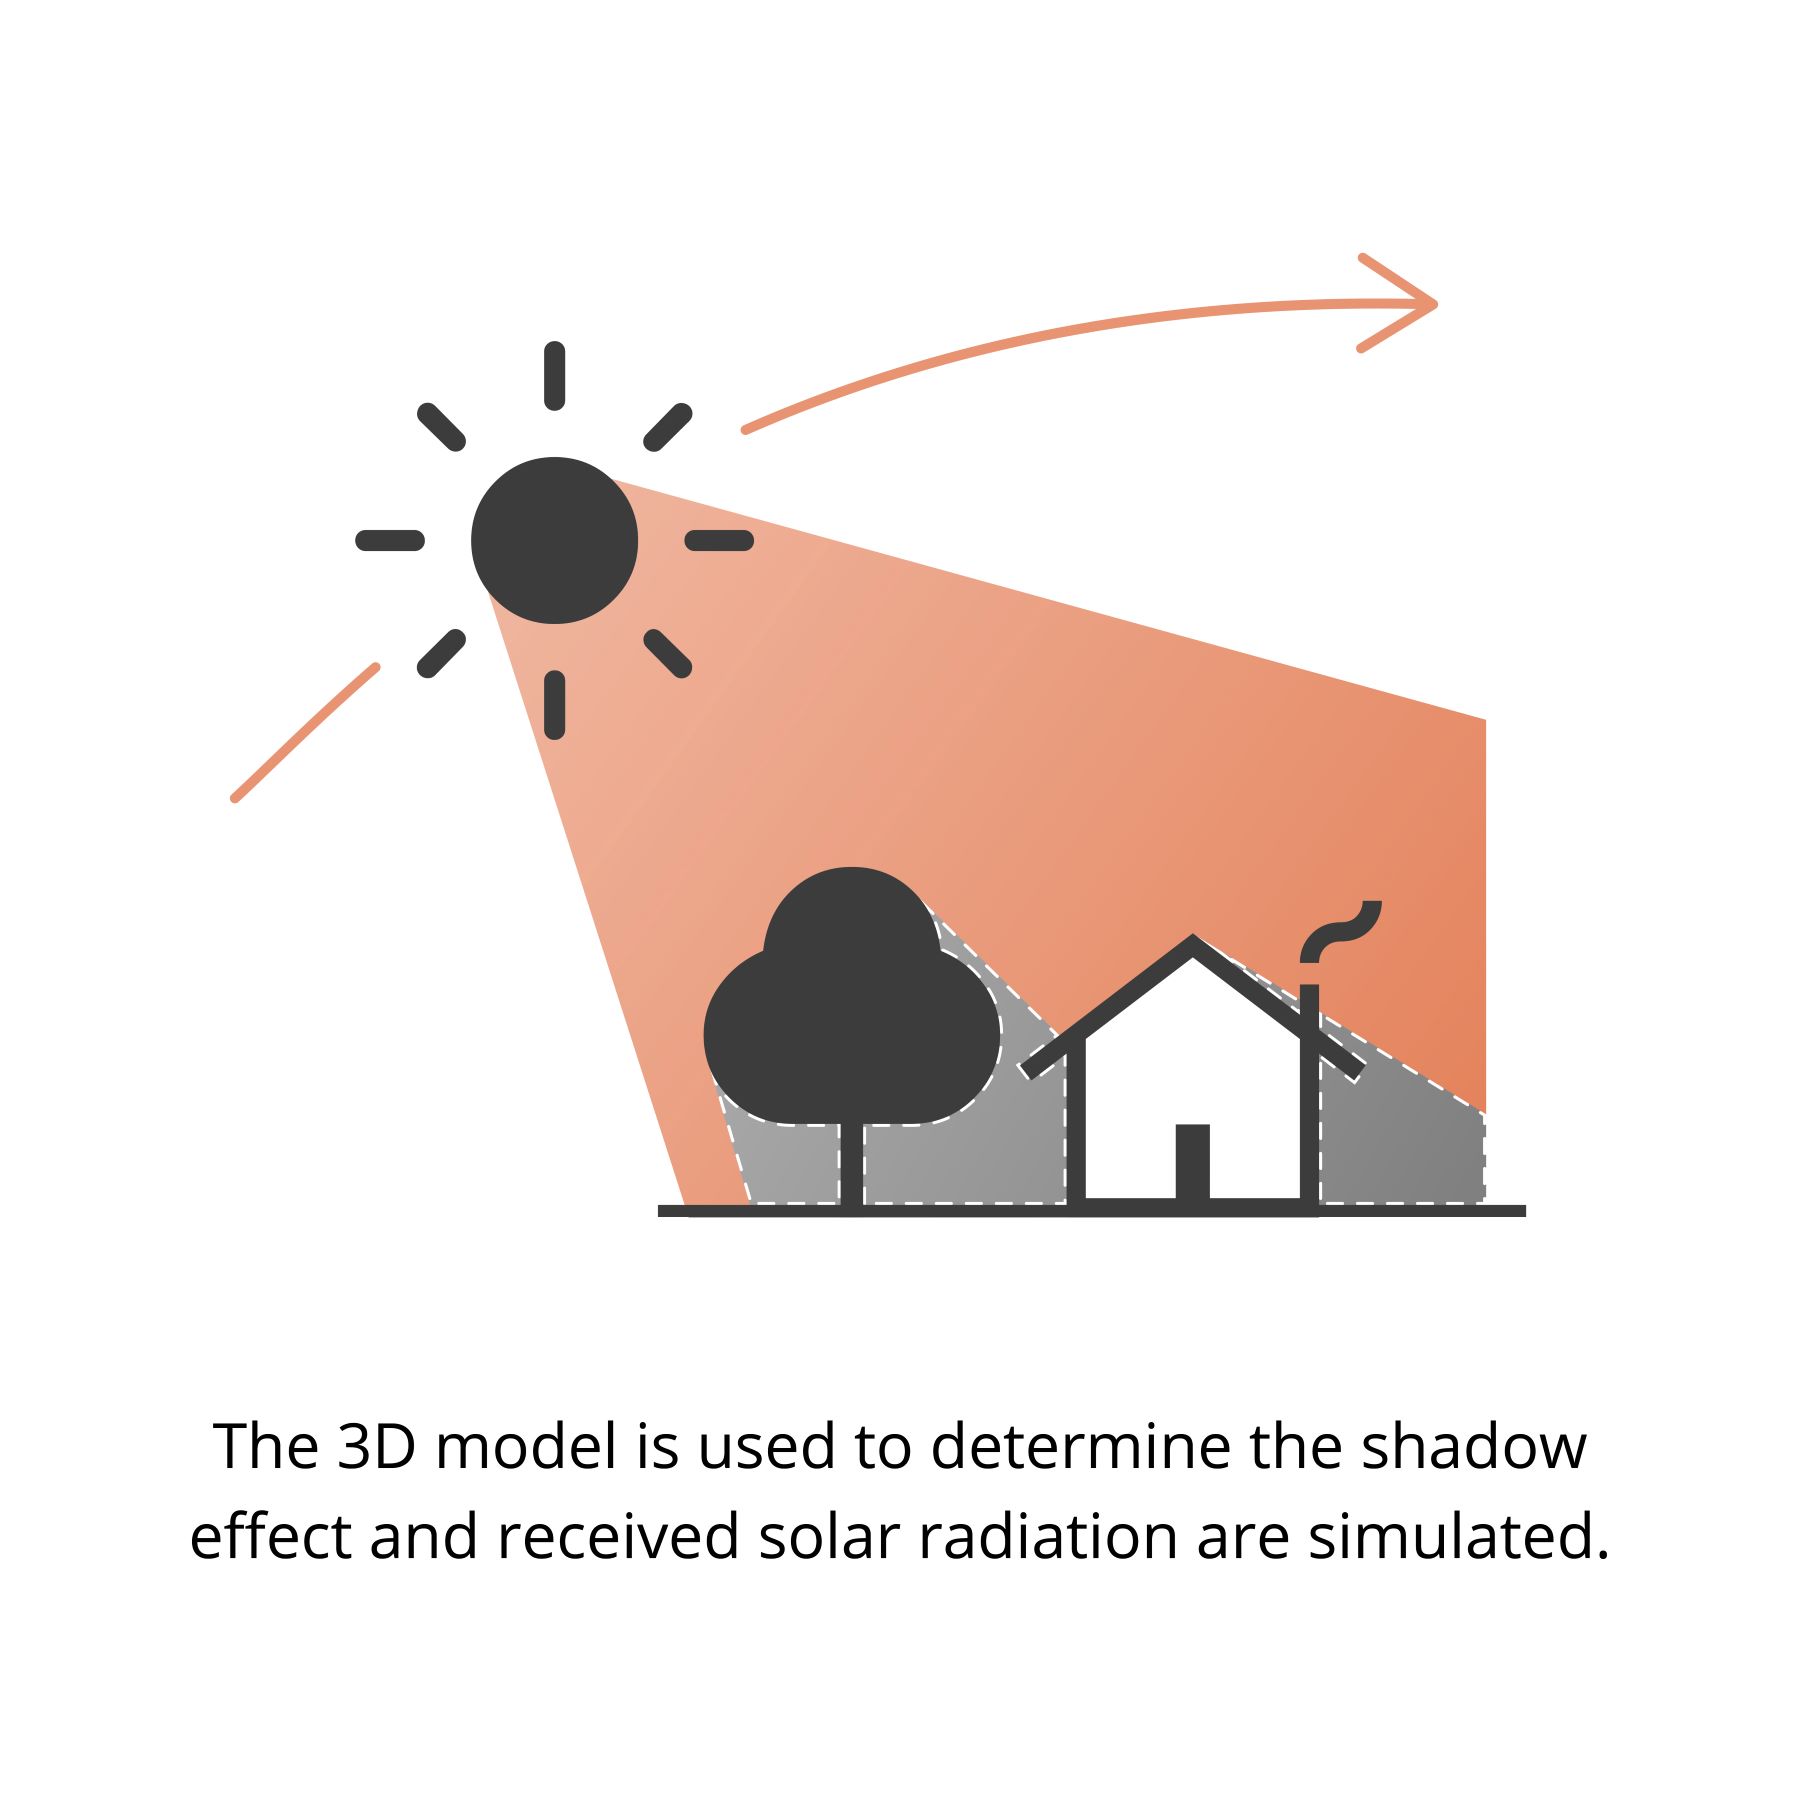 The 3D model is used to determine the shadow effect and received solar radiation are simulated.